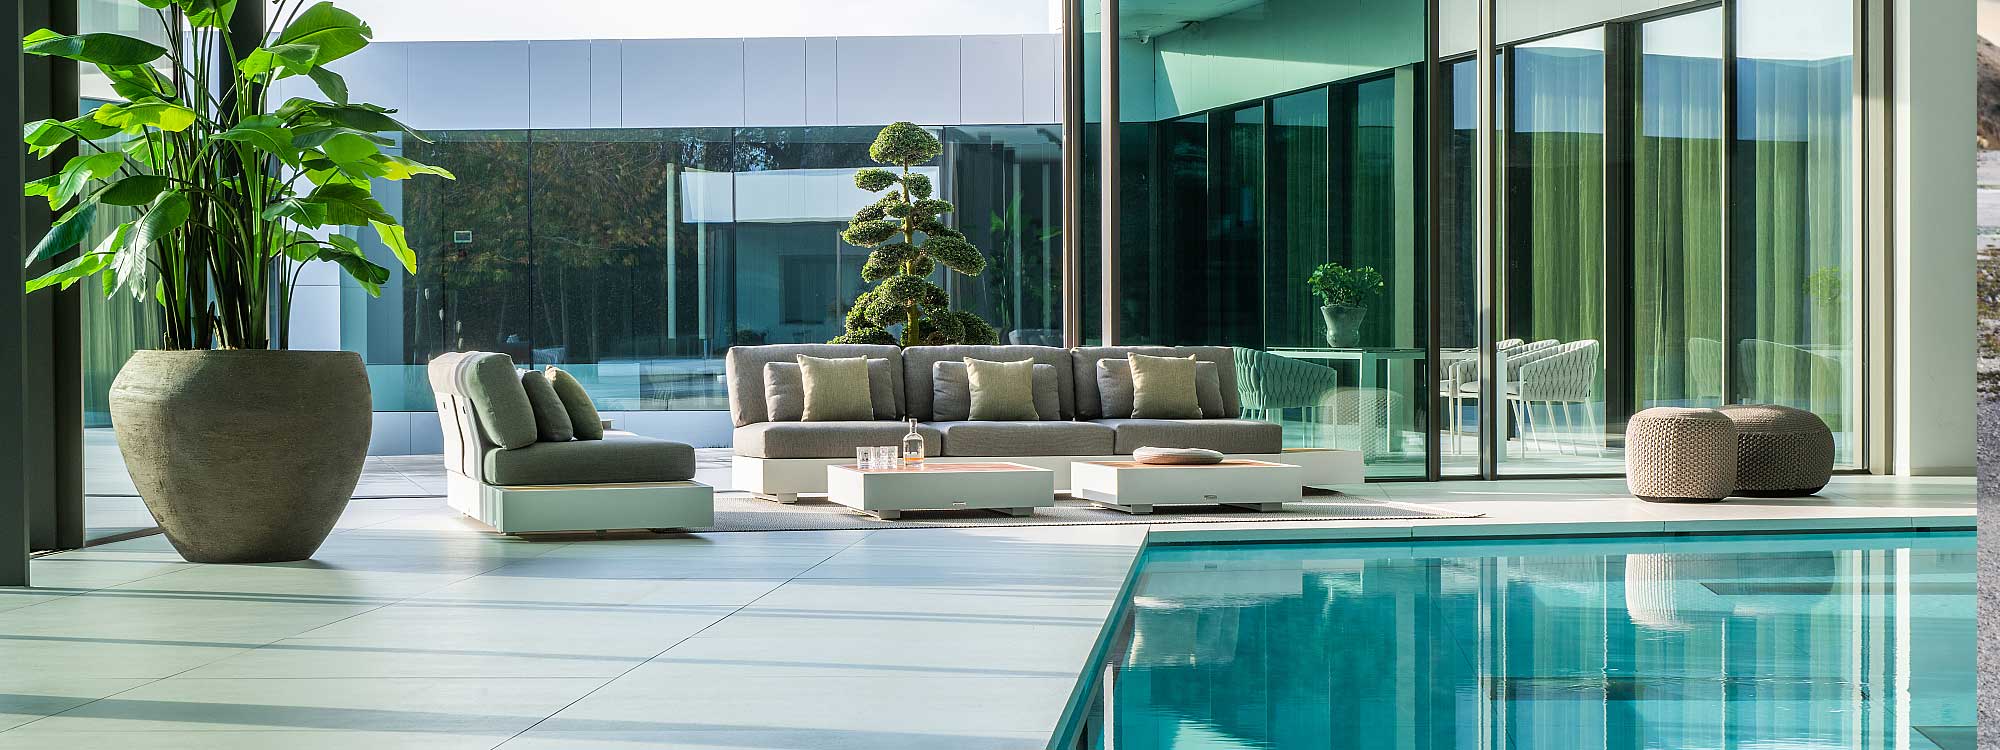 Image of pair of white Bari luxury garden sofas on indoor poolside with Fortuna Socks dining chairs and Vigo XL extending garden table on the terrace outside